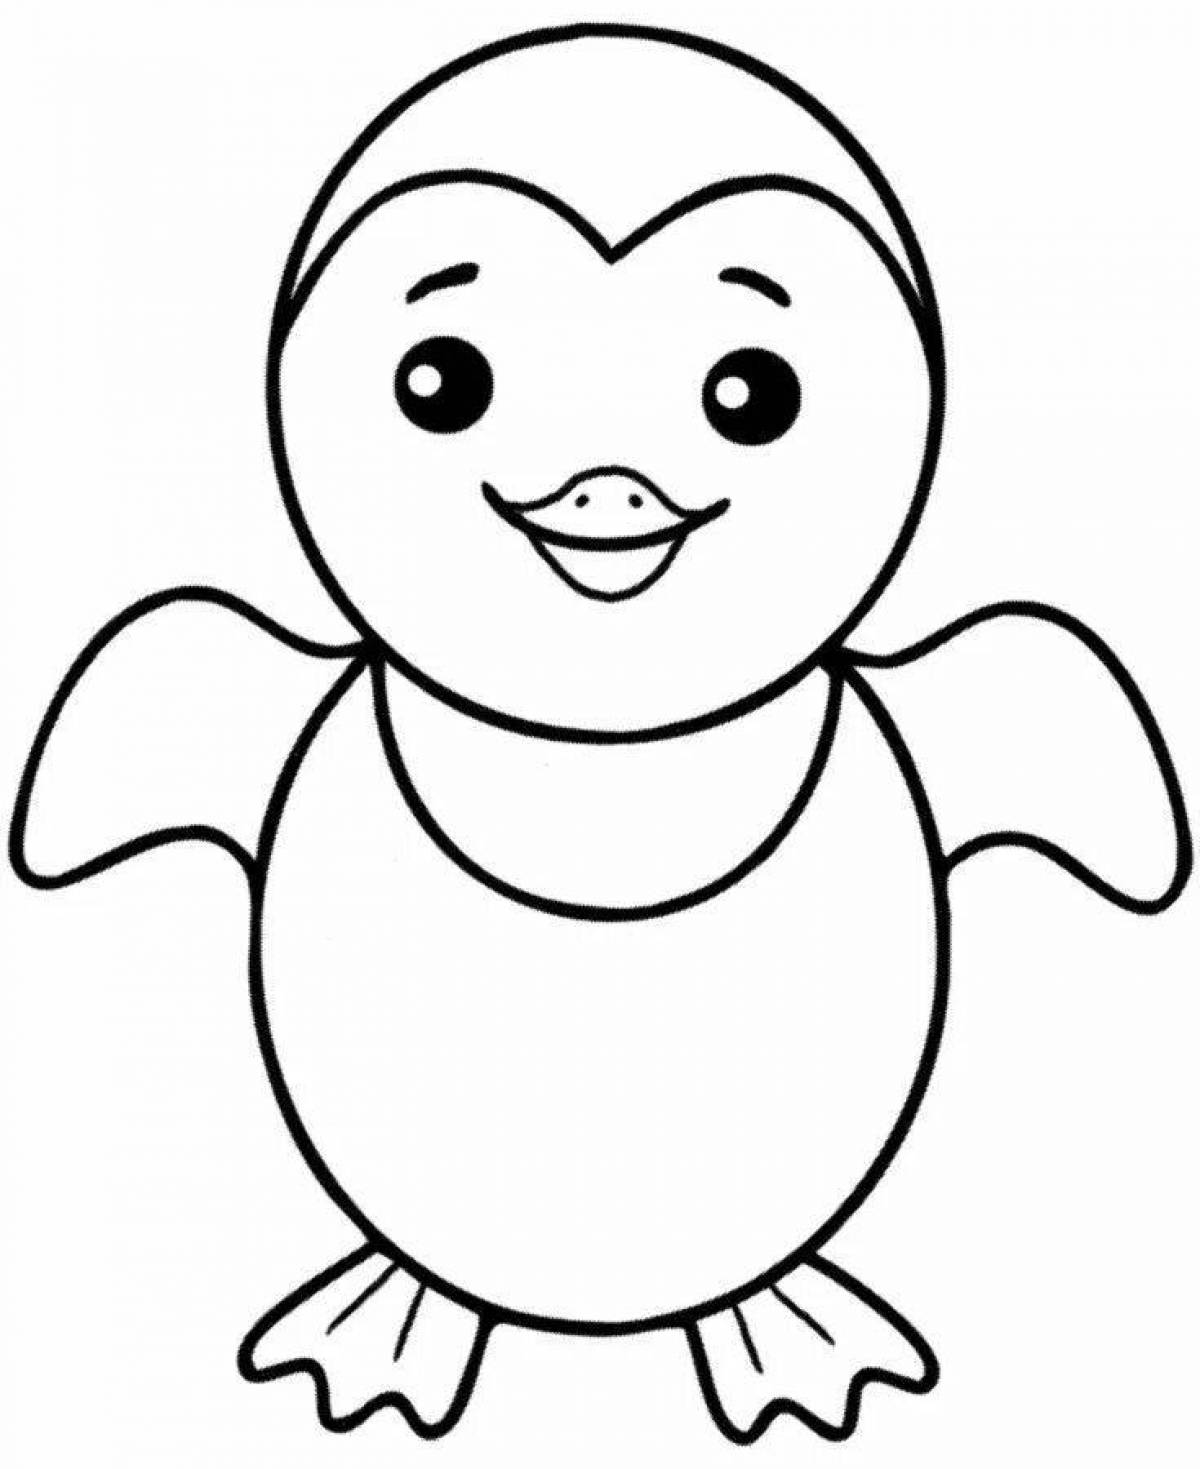 Amazing penguin coloring book for kids